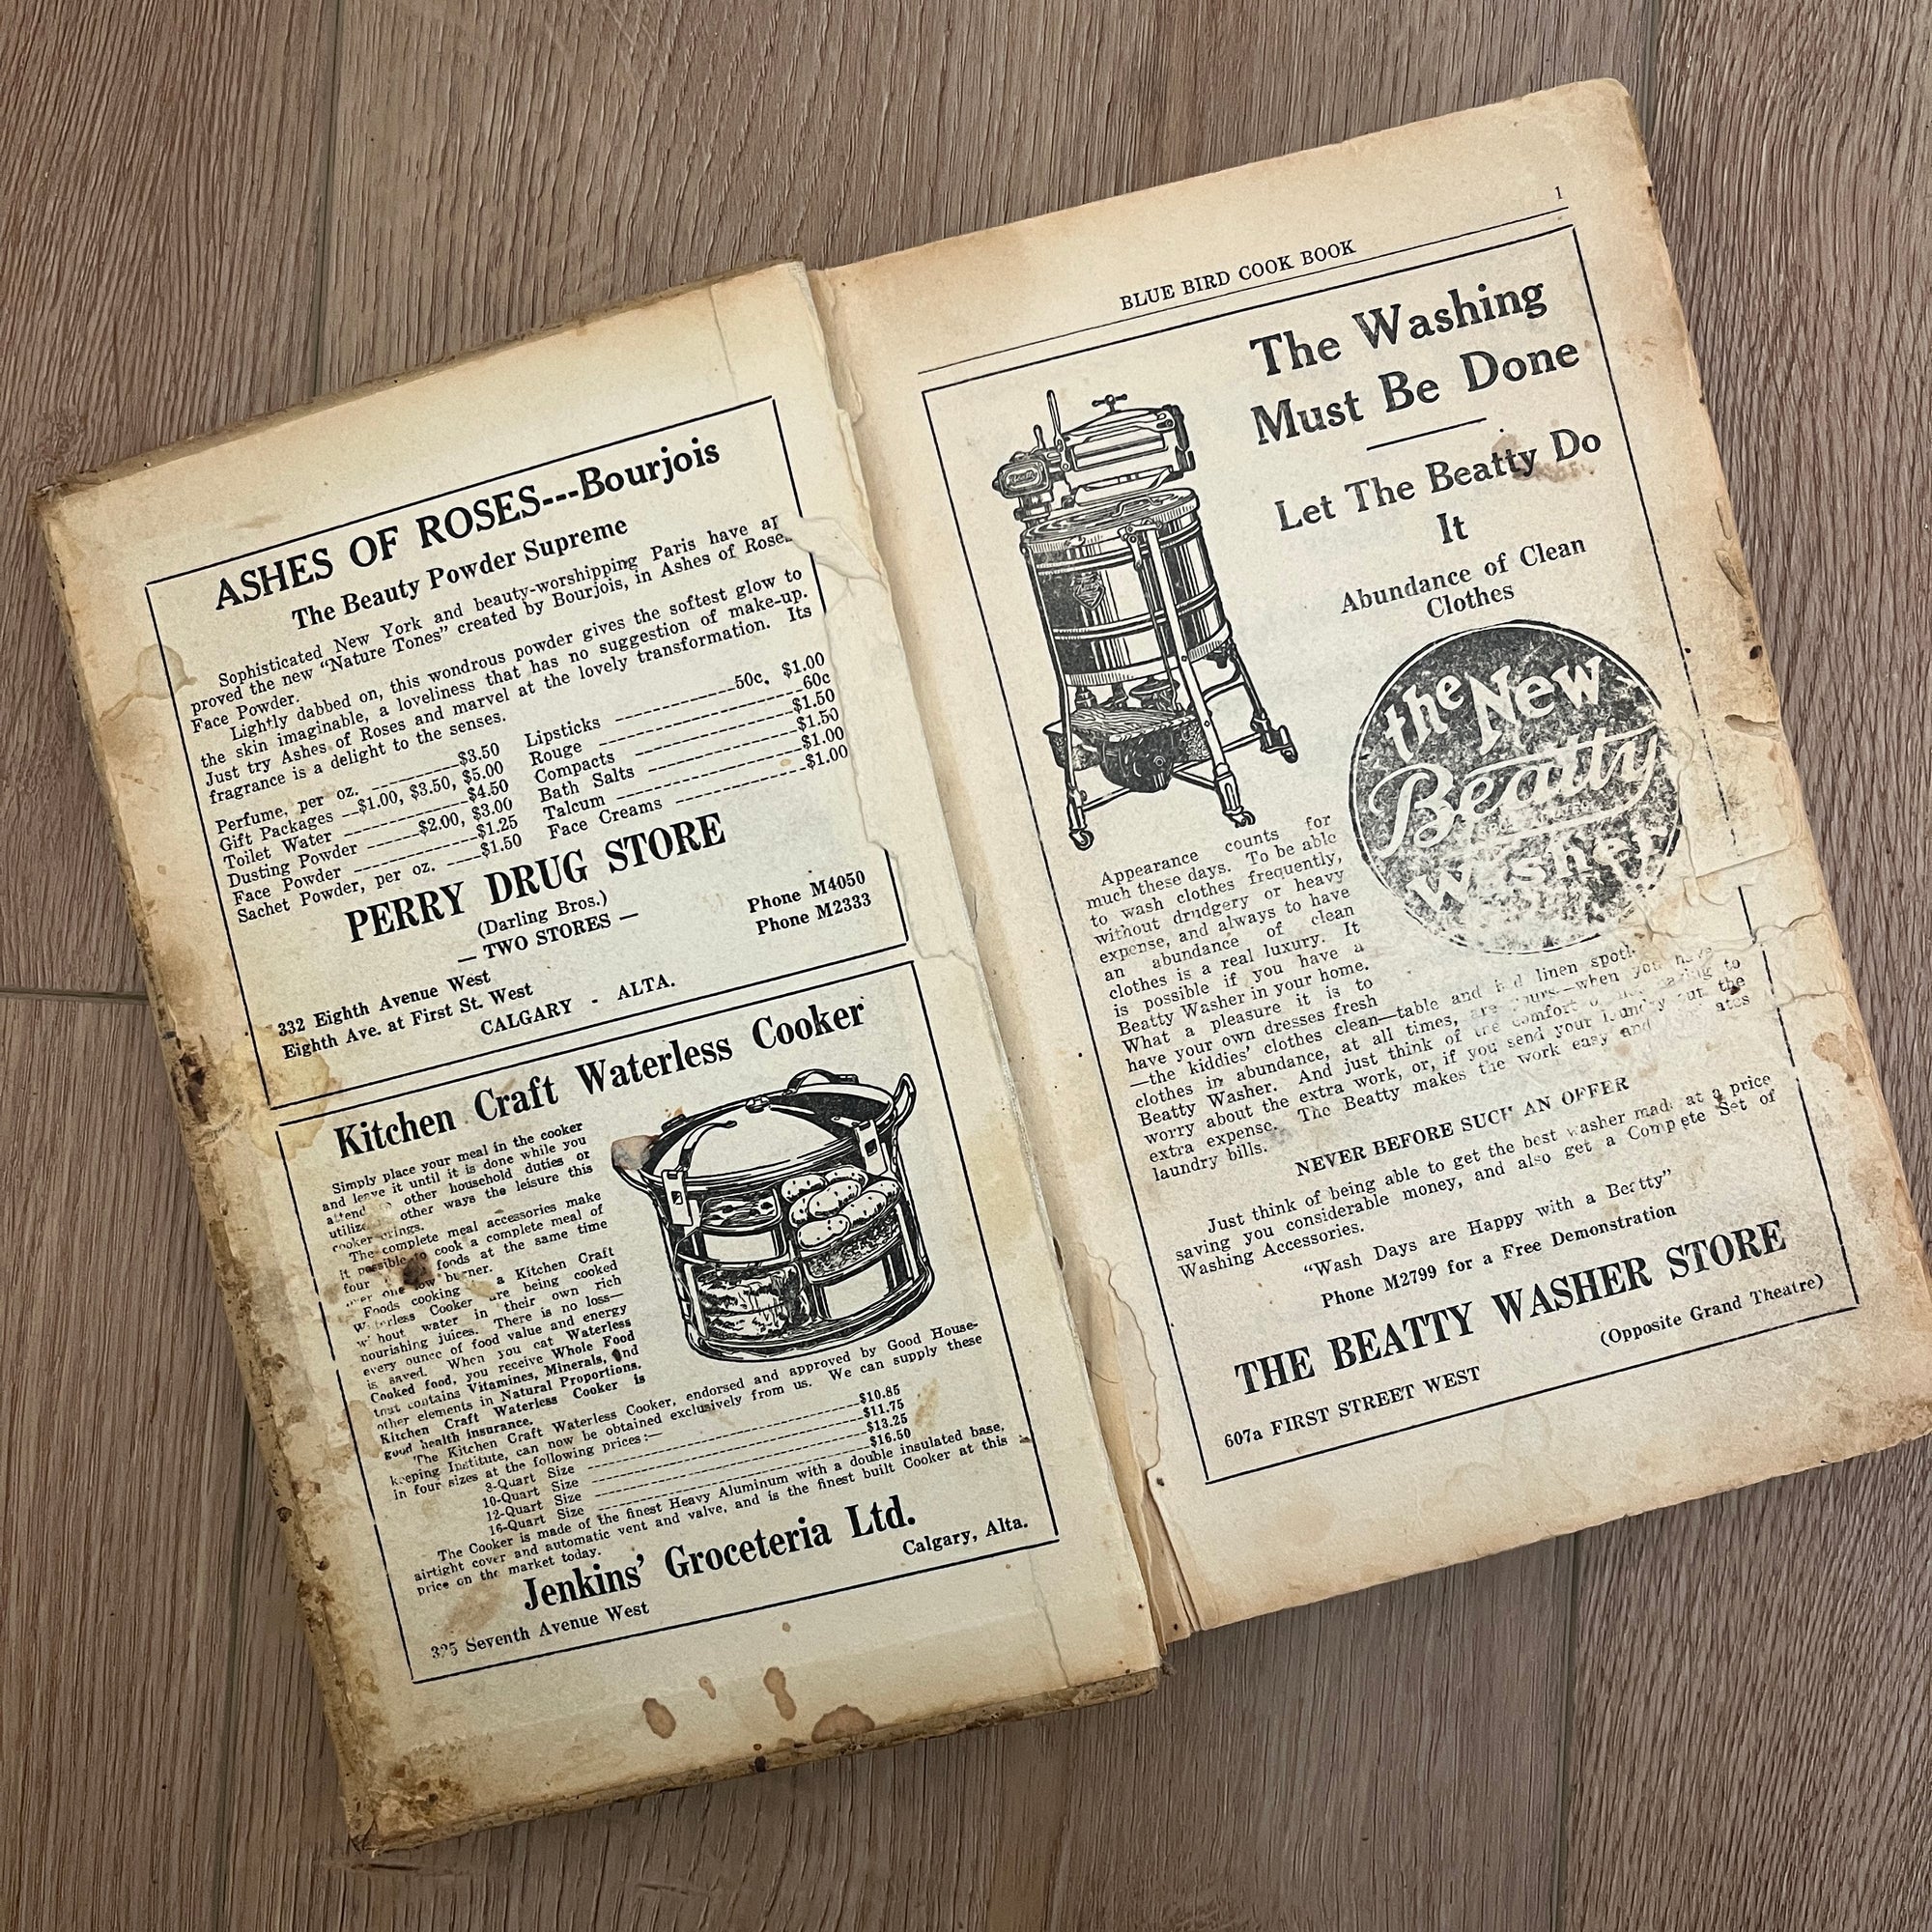 1928 ‘The Blue Bird Cook Book’ - Domestic Science Department